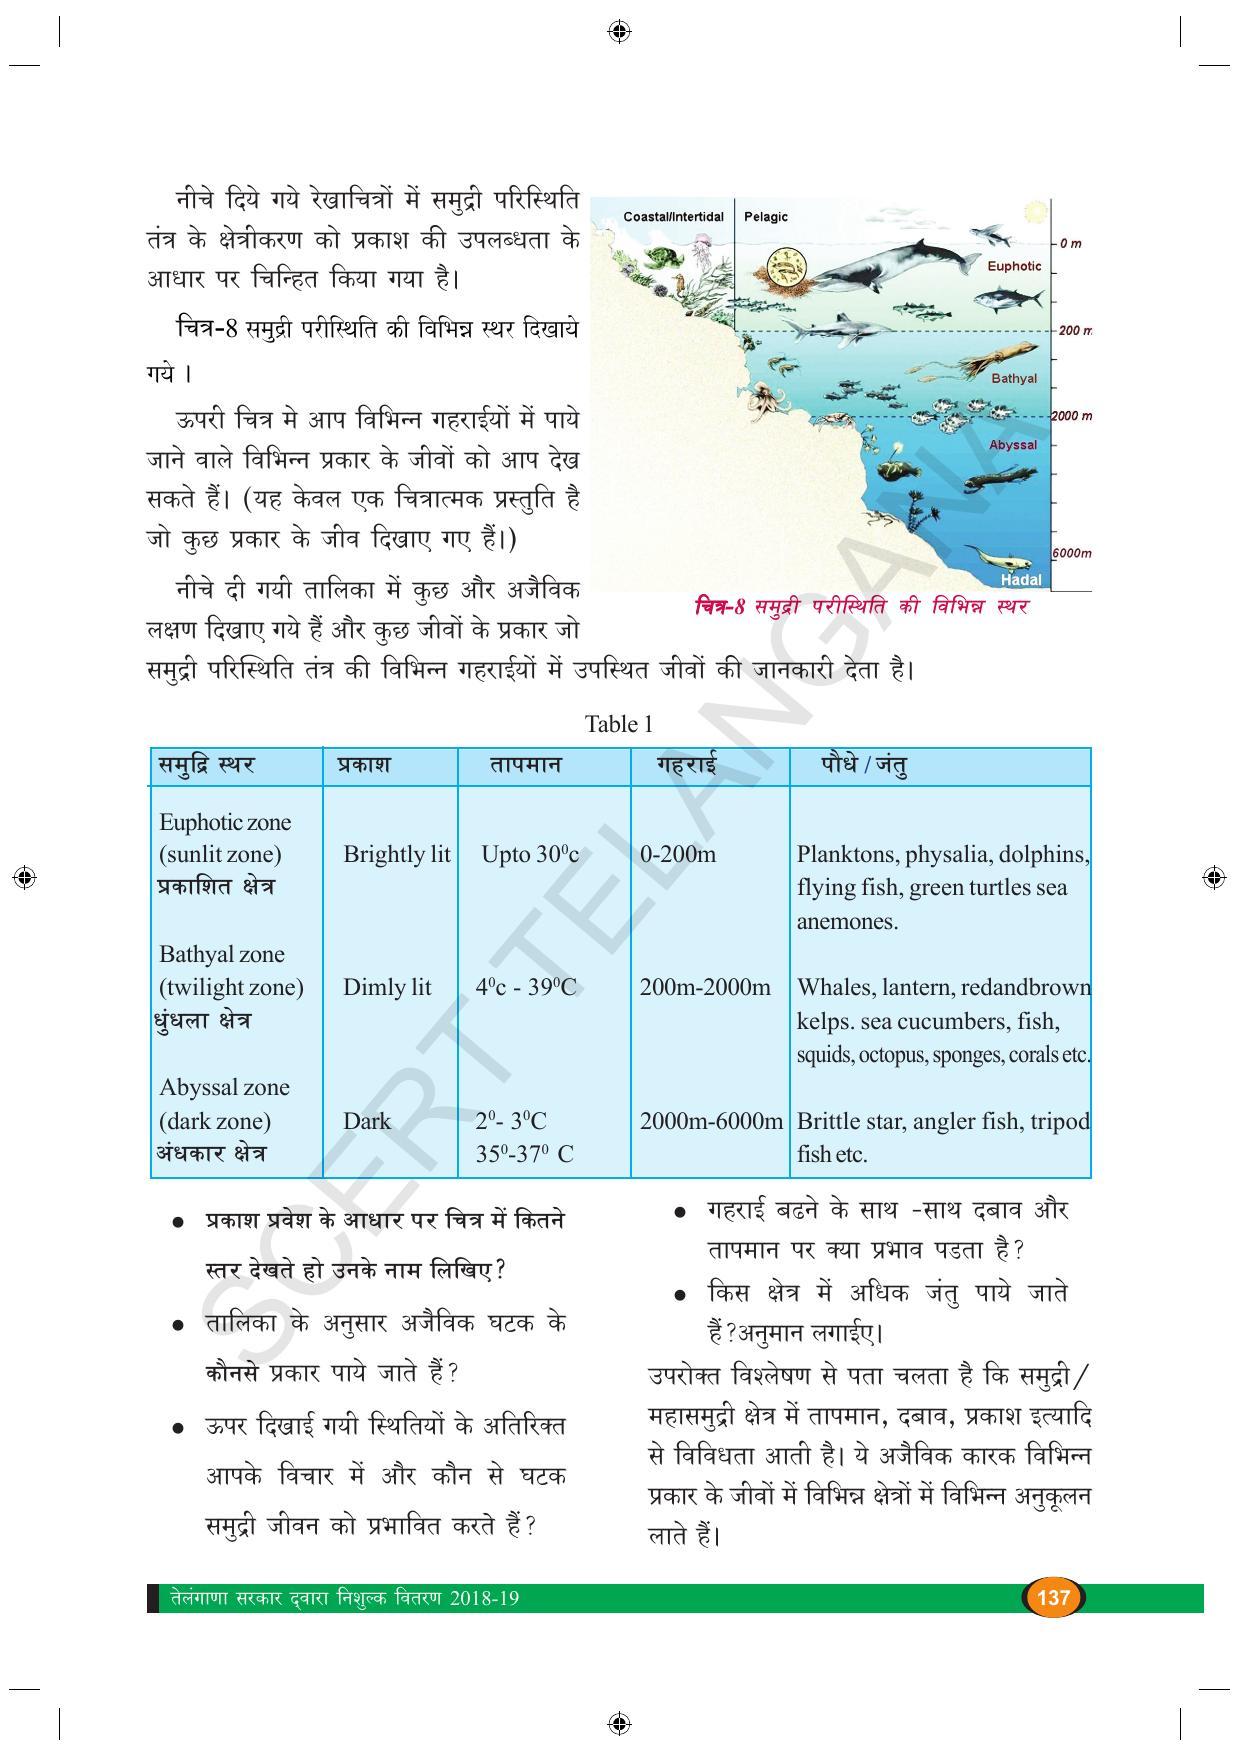 TS SCERT Class 9 Biological Science (Hindi Medium) Text Book - Page 149